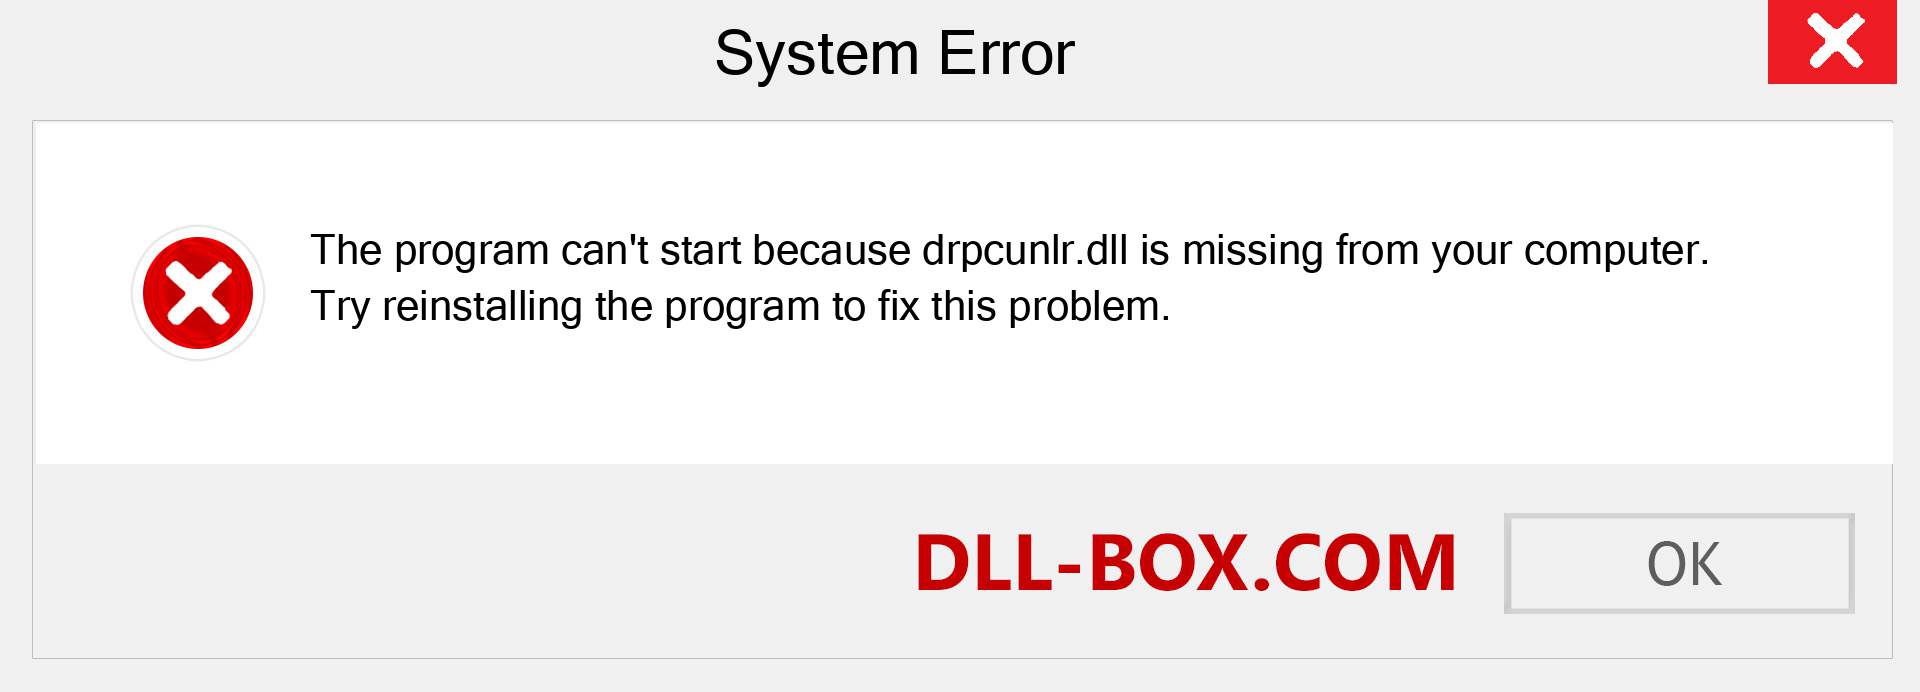  drpcunlr.dll file is missing?. Download for Windows 7, 8, 10 - Fix  drpcunlr dll Missing Error on Windows, photos, images